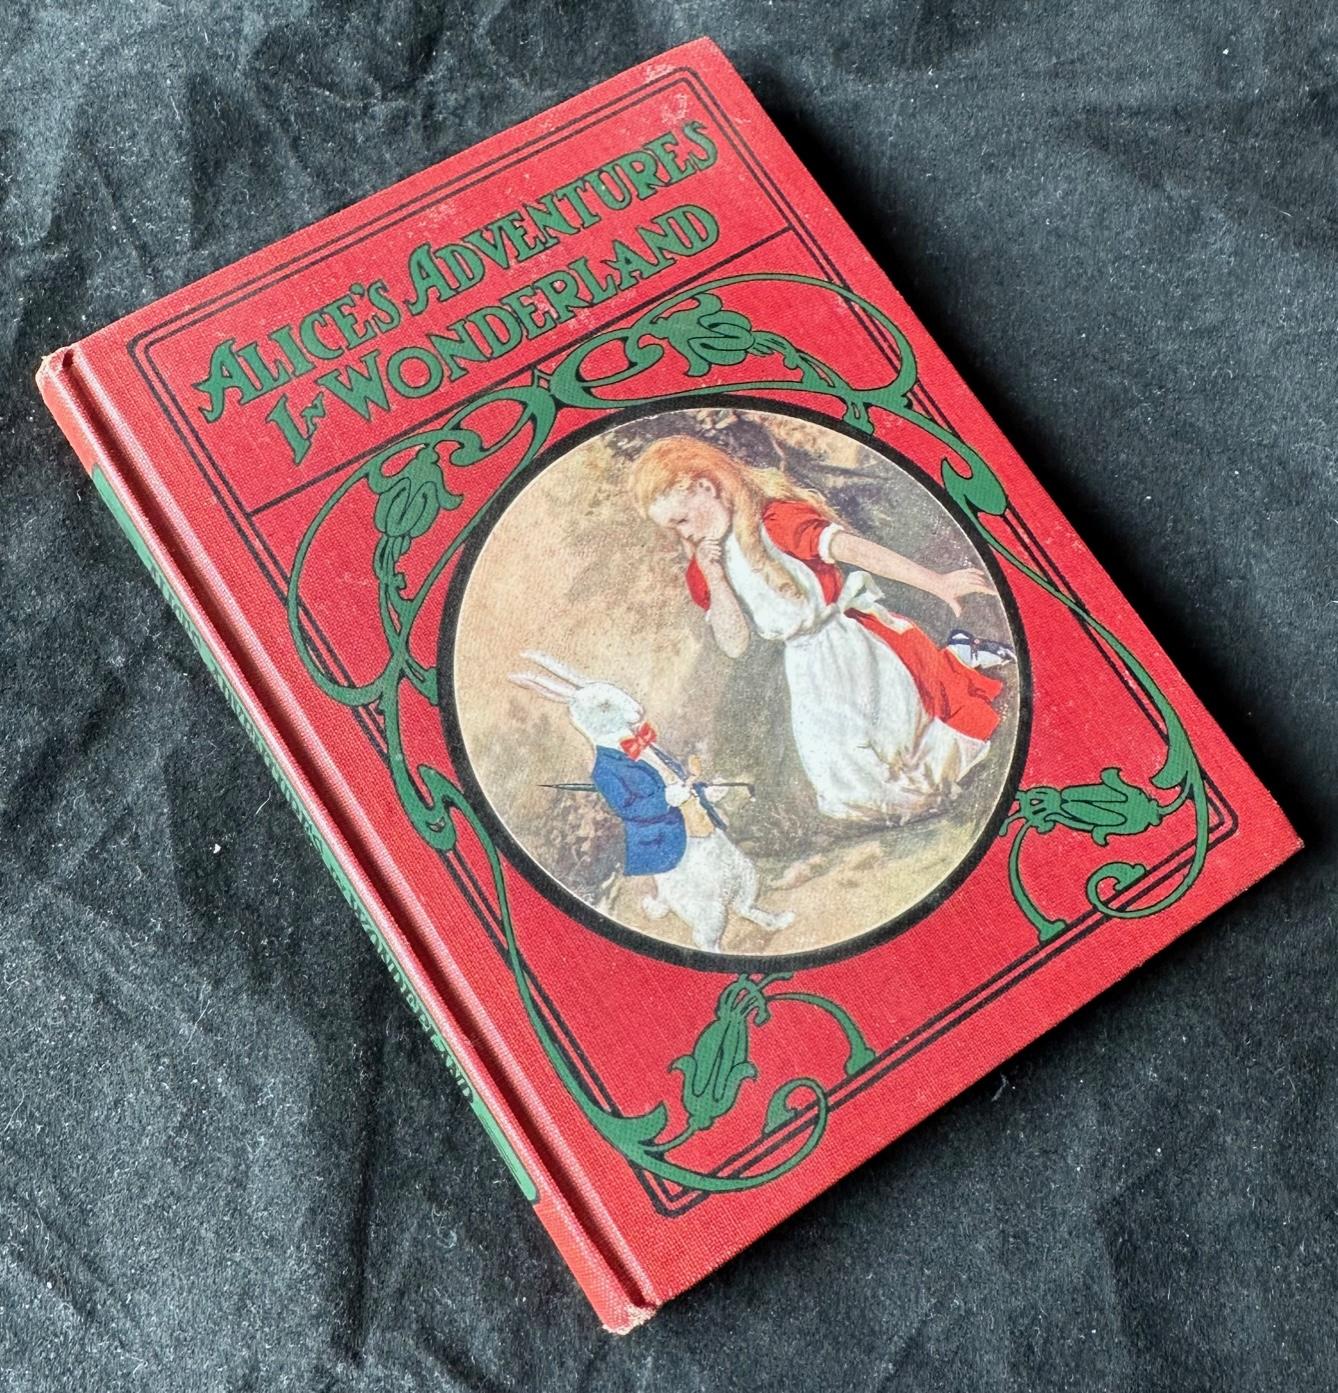 ALICE'S ADVENTURES IN WONDERLAND (Illustrated by John R. Neill who illustrated the original Wizard of Oz)